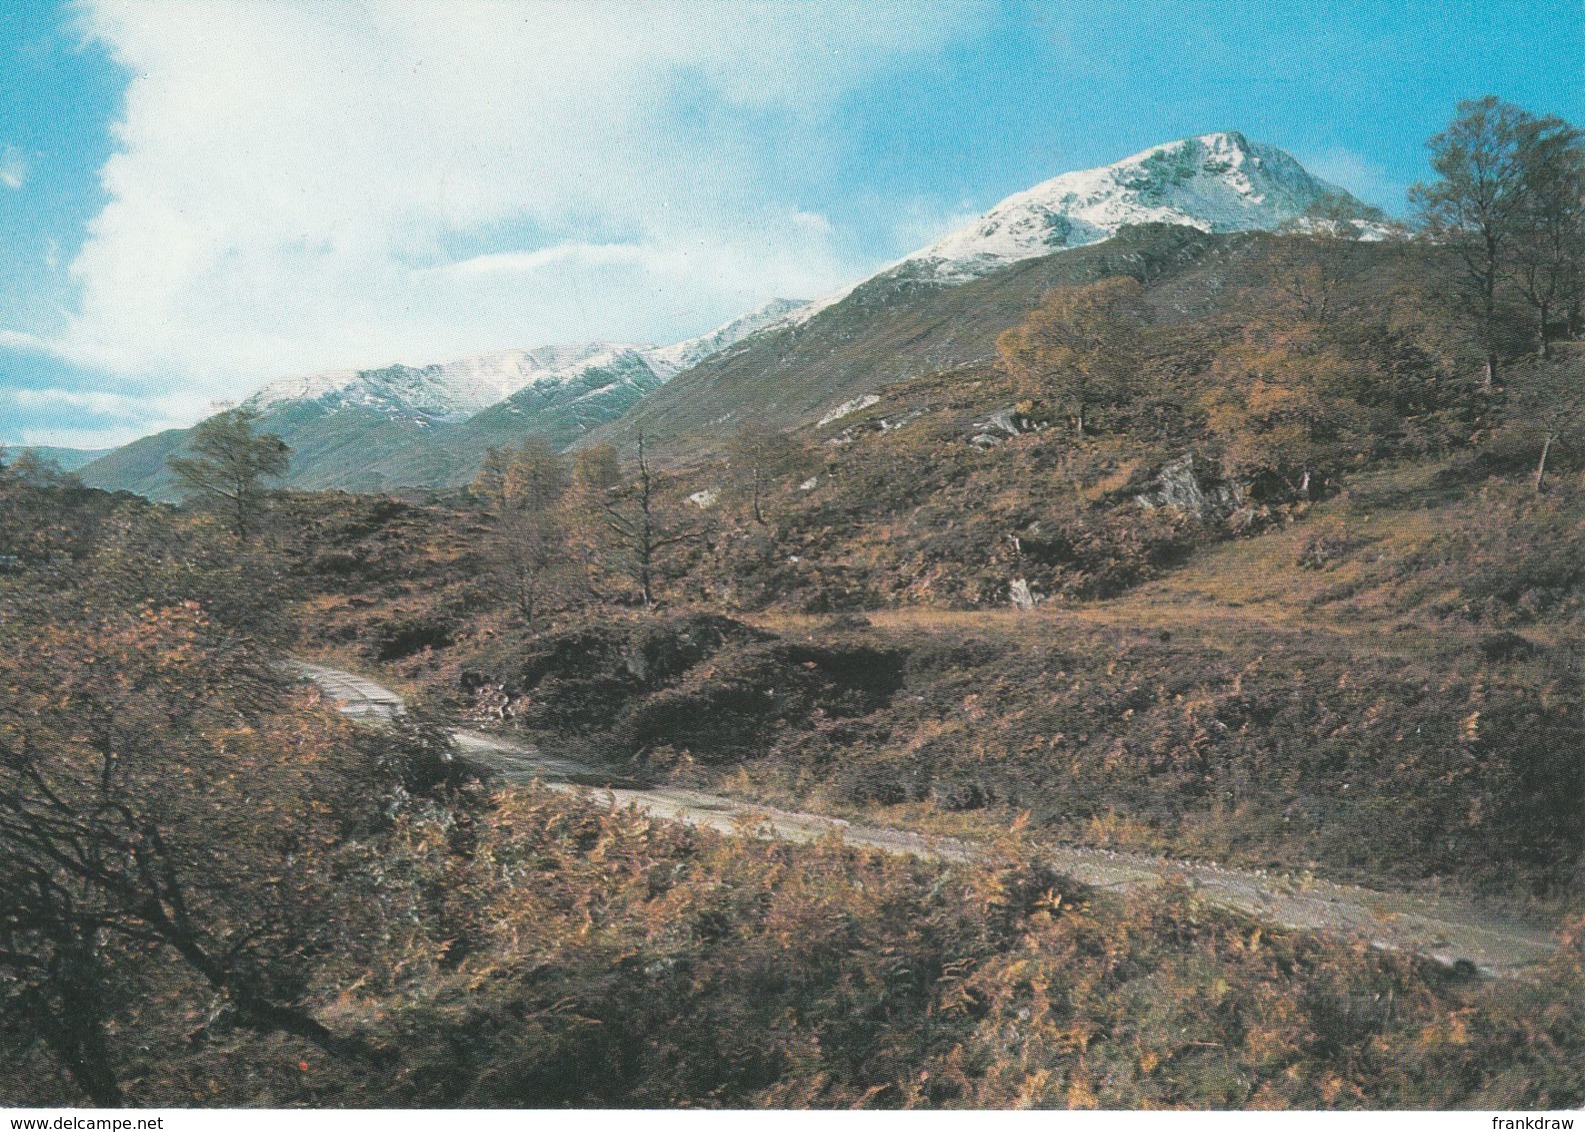 Postcard - Glen Affric In Autume, Inverness - Shire - Card No..85497 Unused Very Good - Unclassified